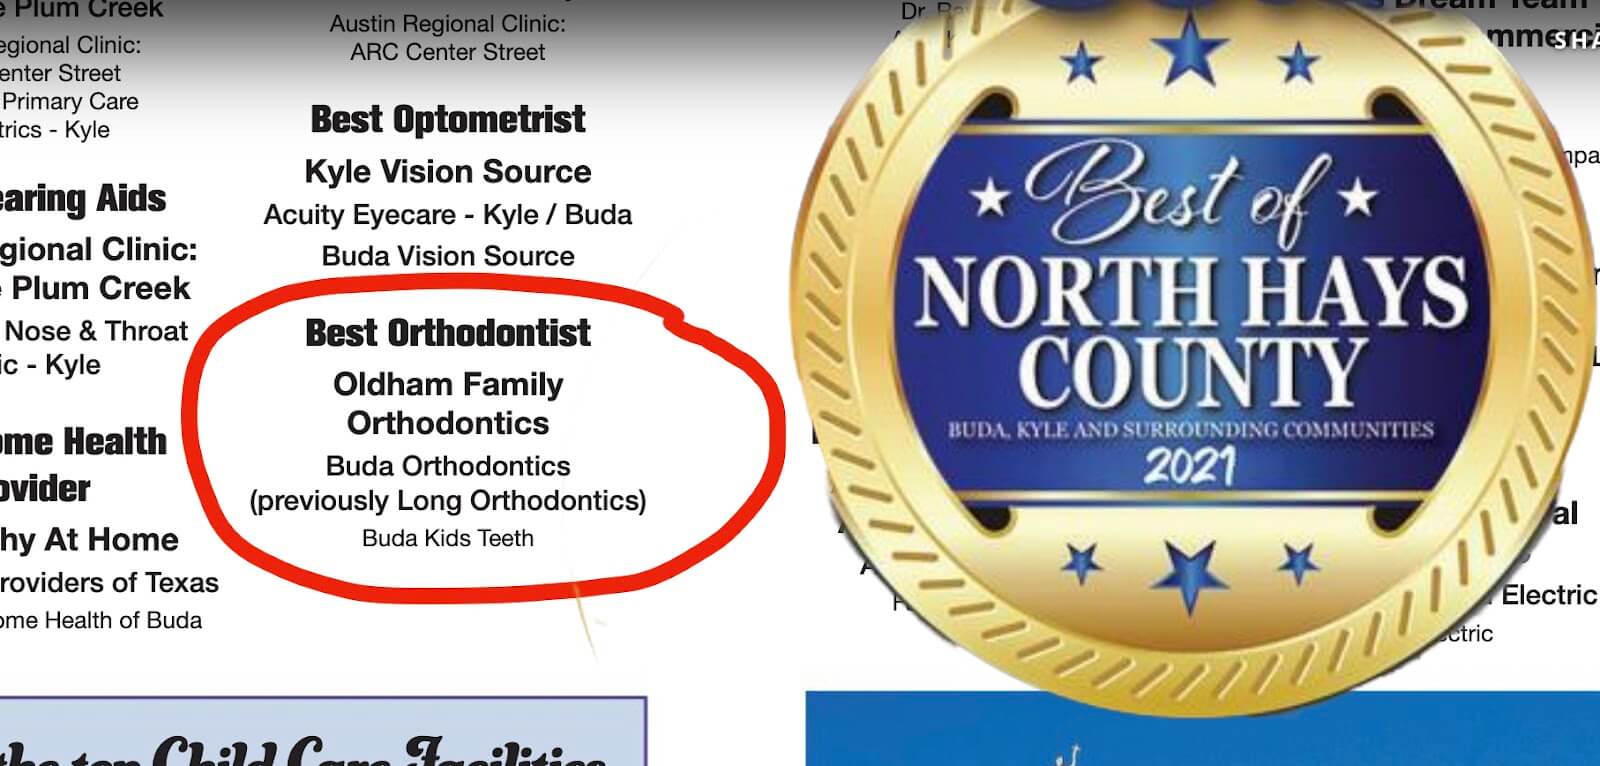 Showing that Oldham Family Orthodontics is the best of North Hays County